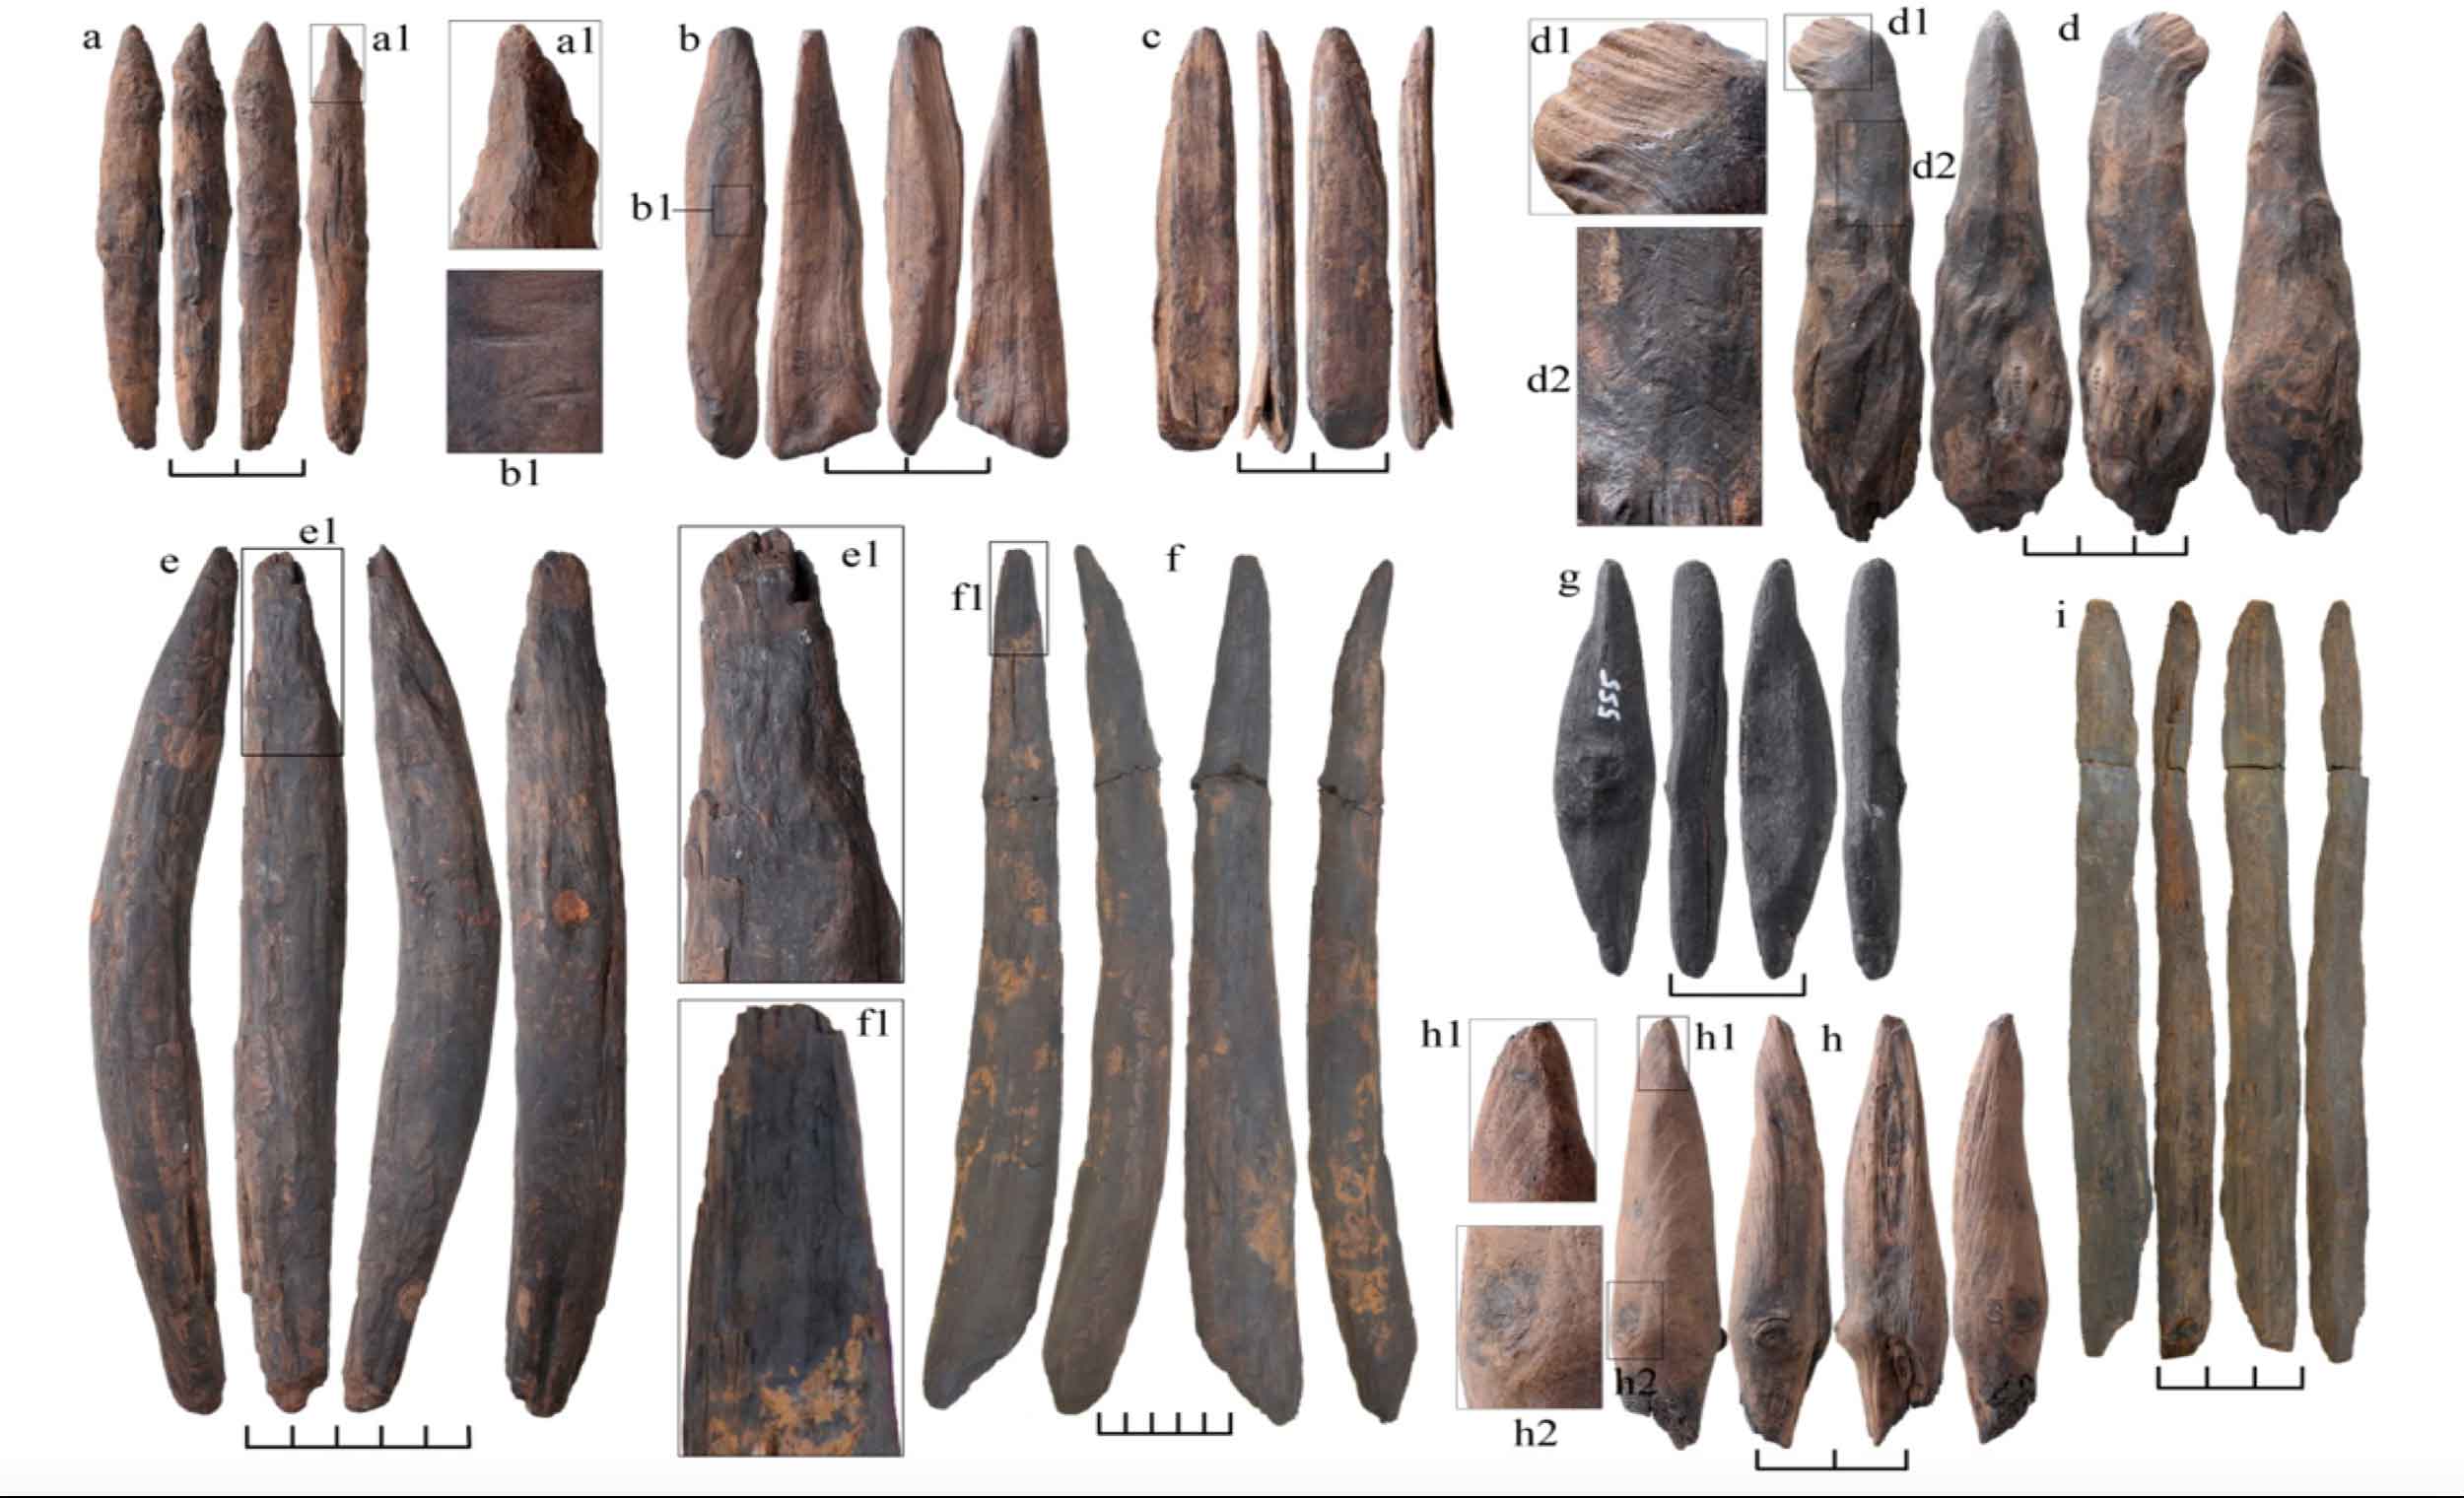 Eight wooden pointed artifacts shown in four views each, and additional closeup images of some of the points.